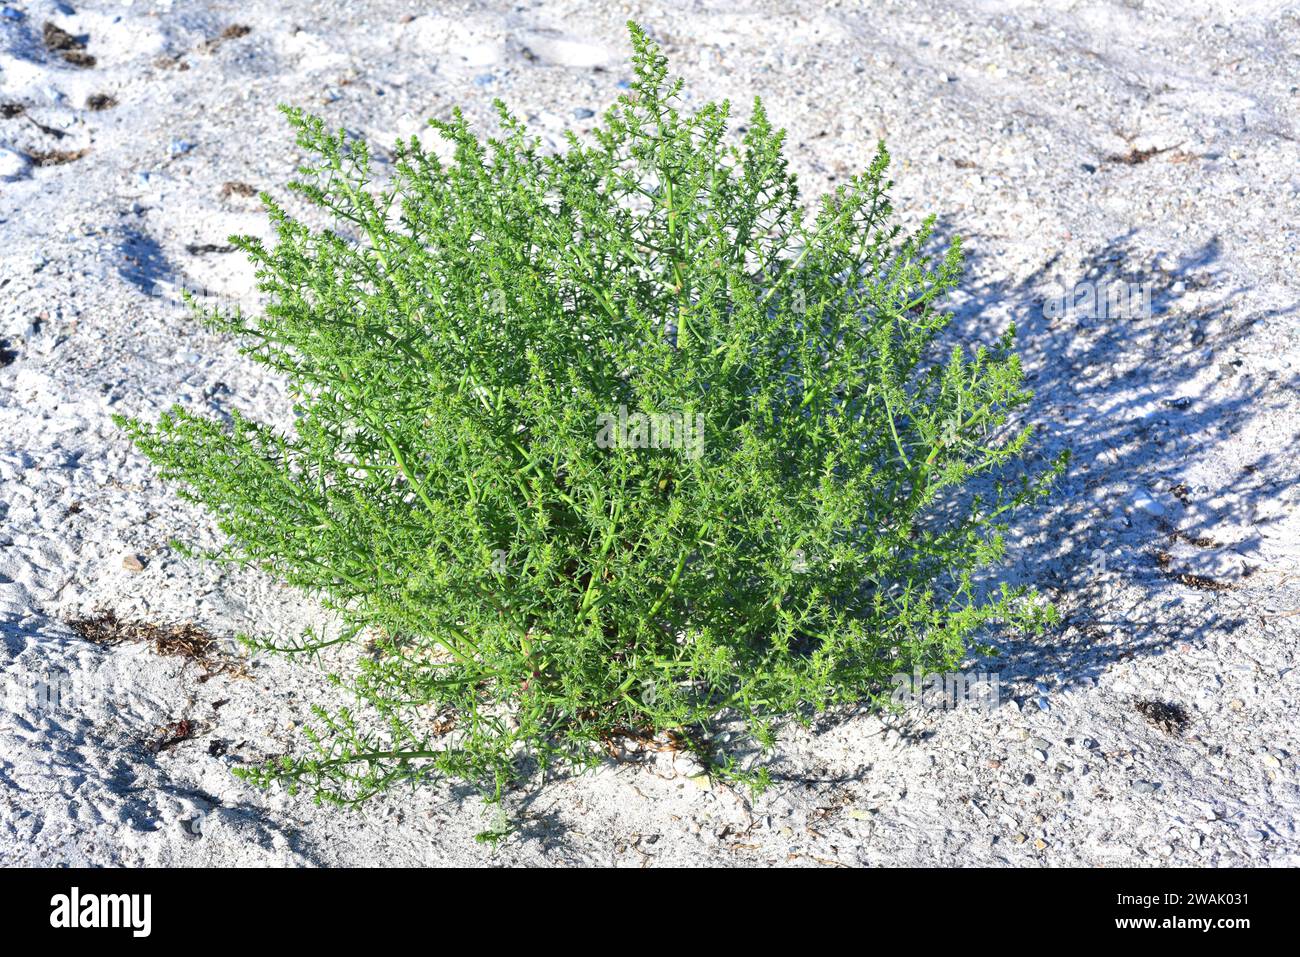 Common saltwort or prickly saltwort (Salsola kali or Kali tragus) is an annual prickly herb native to Eurasia and north Africa. This photo was taken i Stock Photo